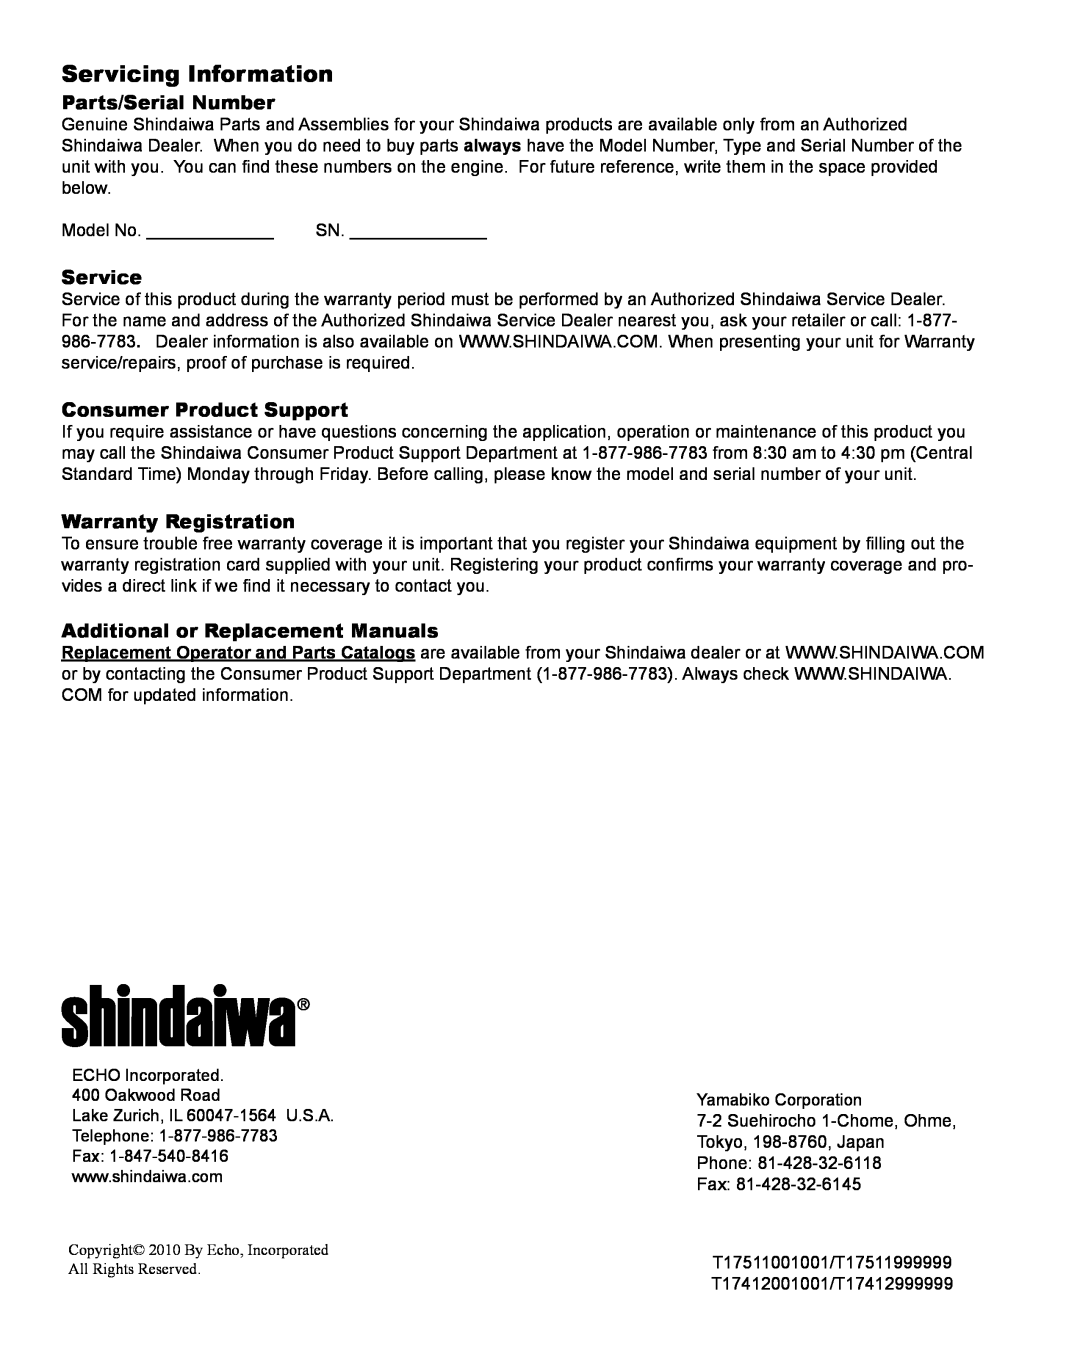 Shindaiwa AH242 manual Servicing Information, Parts/Serial Number, Service, Consumer Product Support, Warranty Registration 